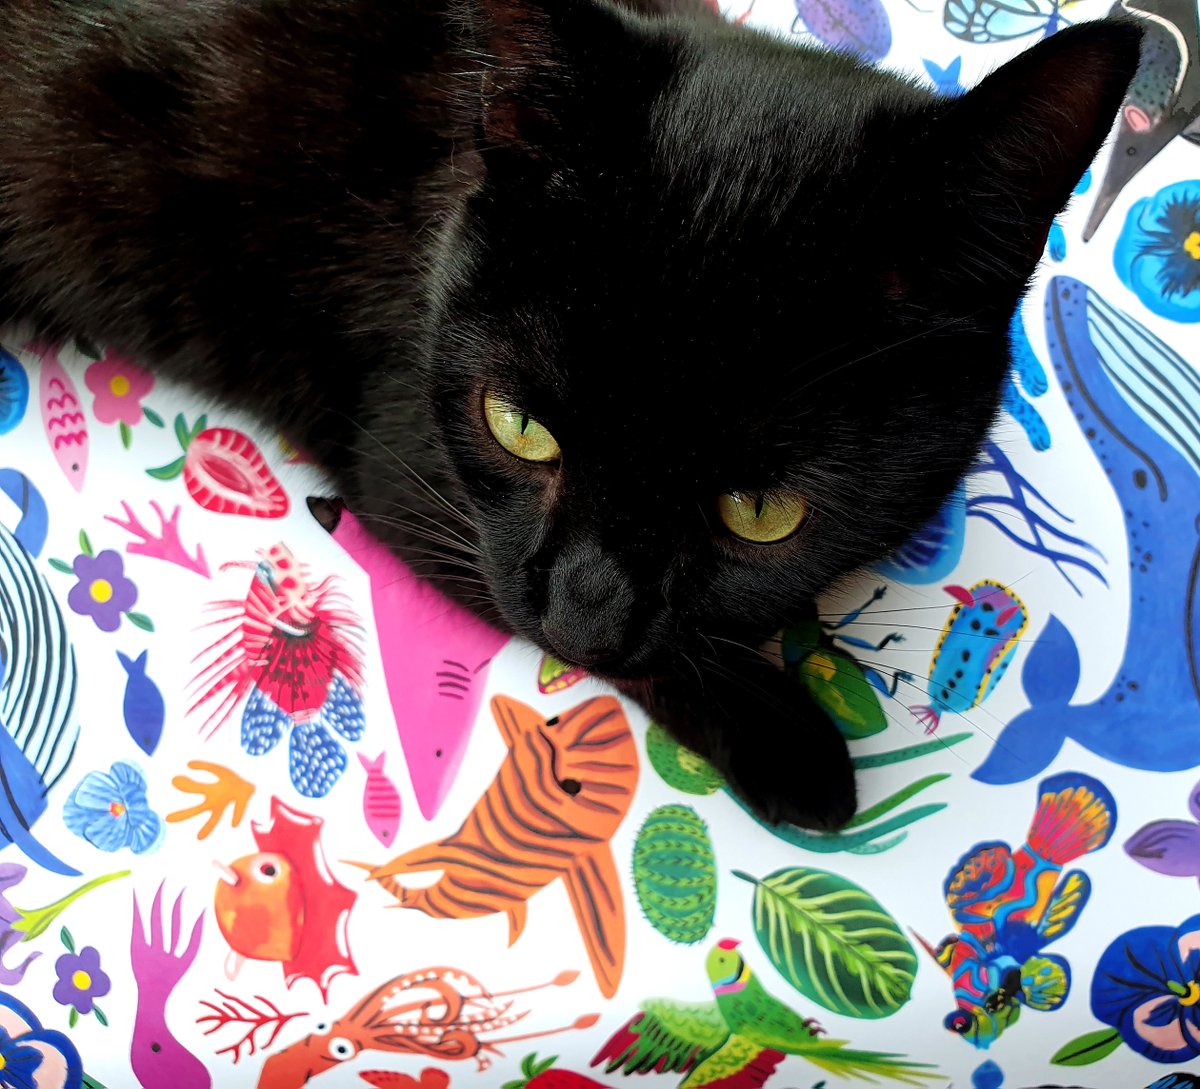 Love receiving samples! The quality of the giftwrap is wonderful. Such vibrant colours. Even Willow my kitty approves! Link to shop 👉bit.ly/3JYBRpY @EBirdcards #birthday #wrappingpaper #giftwrap #Illustrator